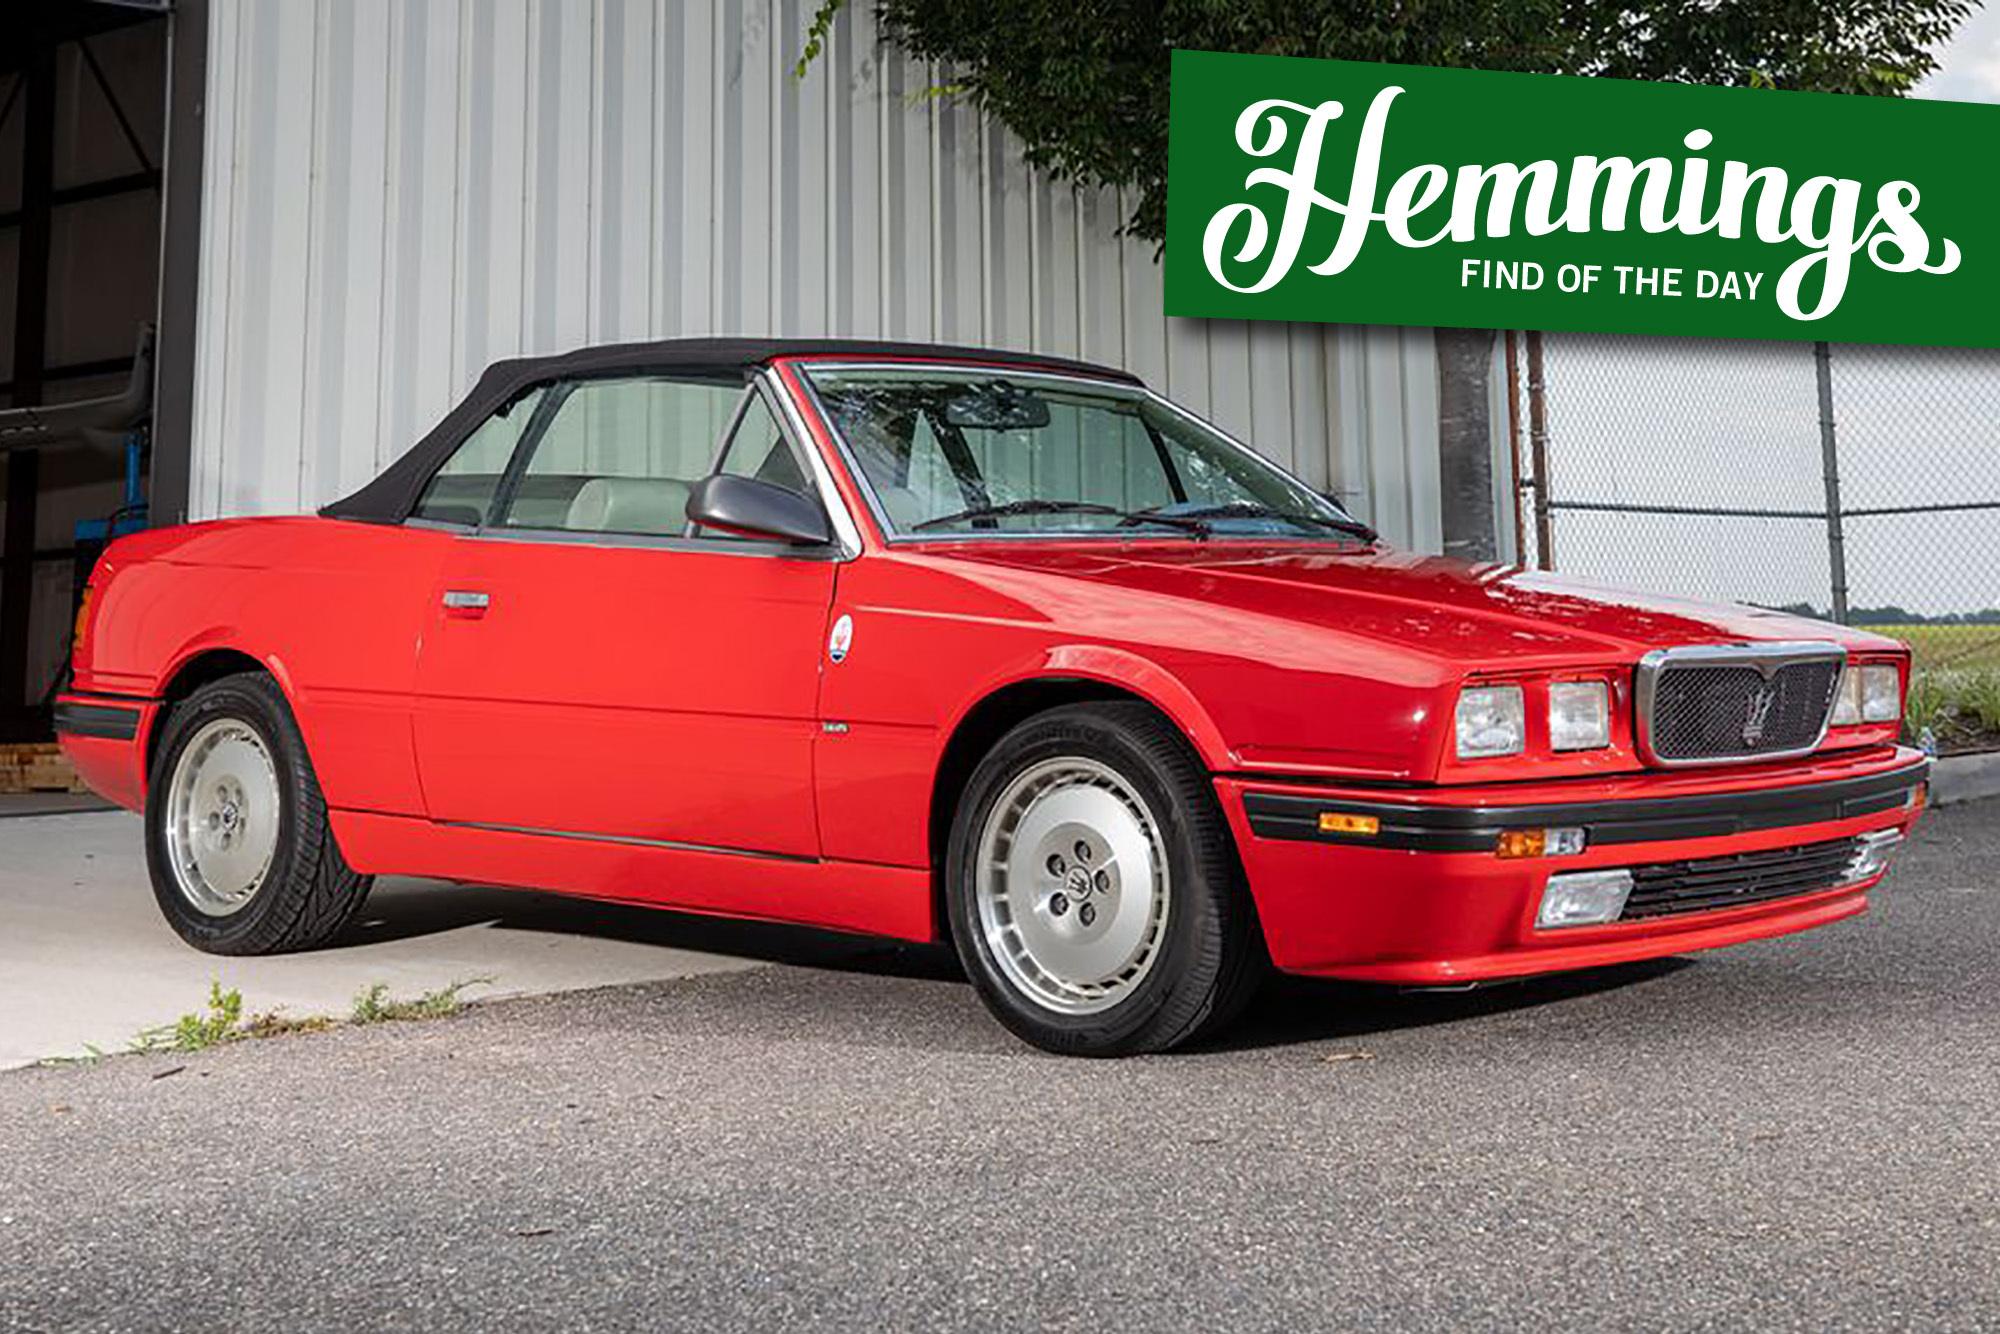 Better than a Biturbo, this 1990 Maserati Spyder '90 has all the leather, wood, and turbos one could want